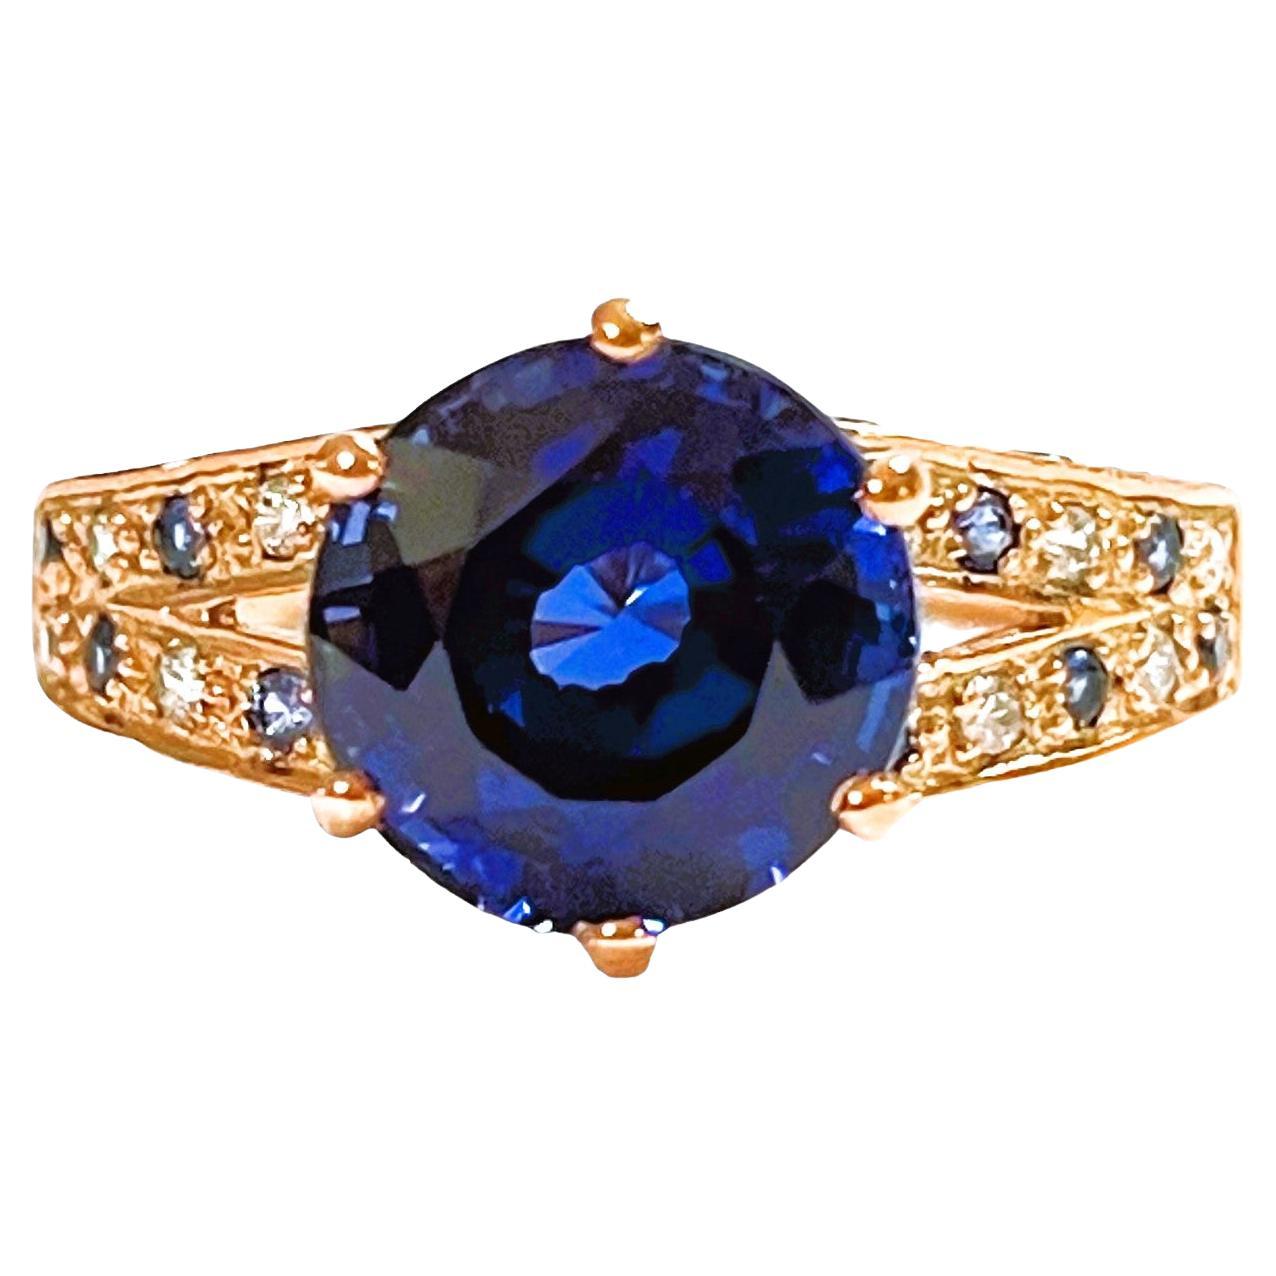 New African 3.70 Ct Kashmir Blue Sapphire & Sapphire Rgold Plated Sterling Ring